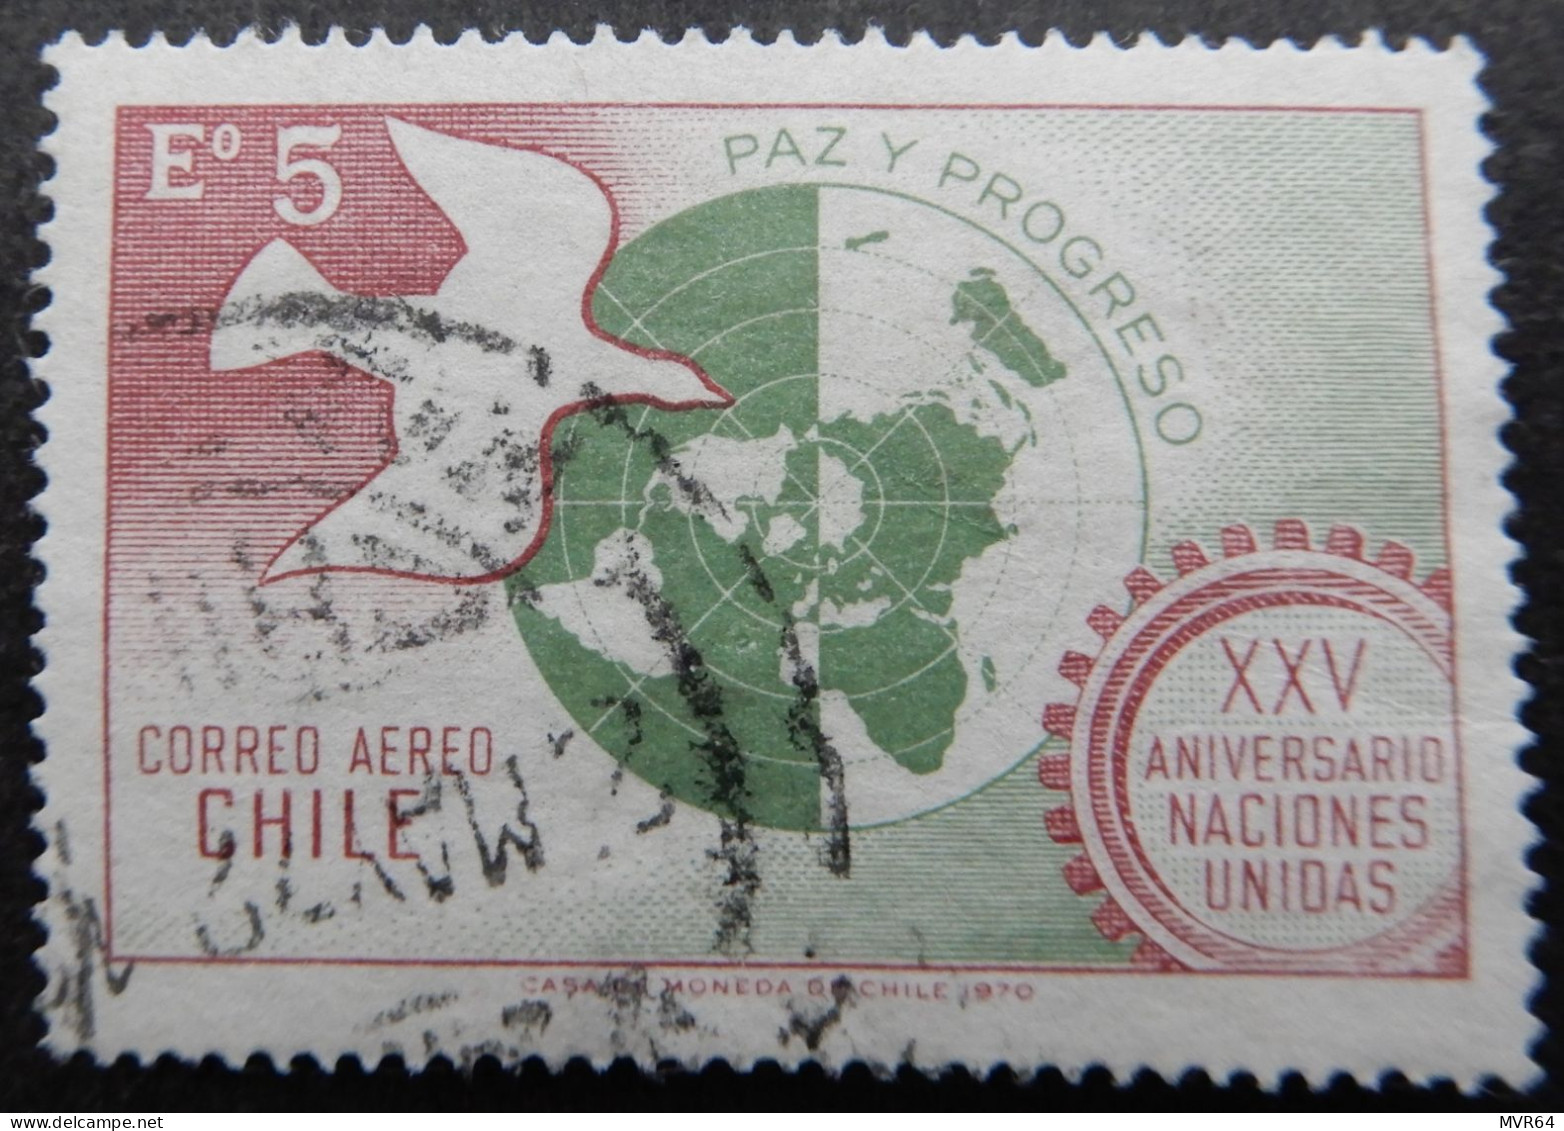 Chili Chile 1970 (2) Airmail The 25tn An. Of United Nations - Cile